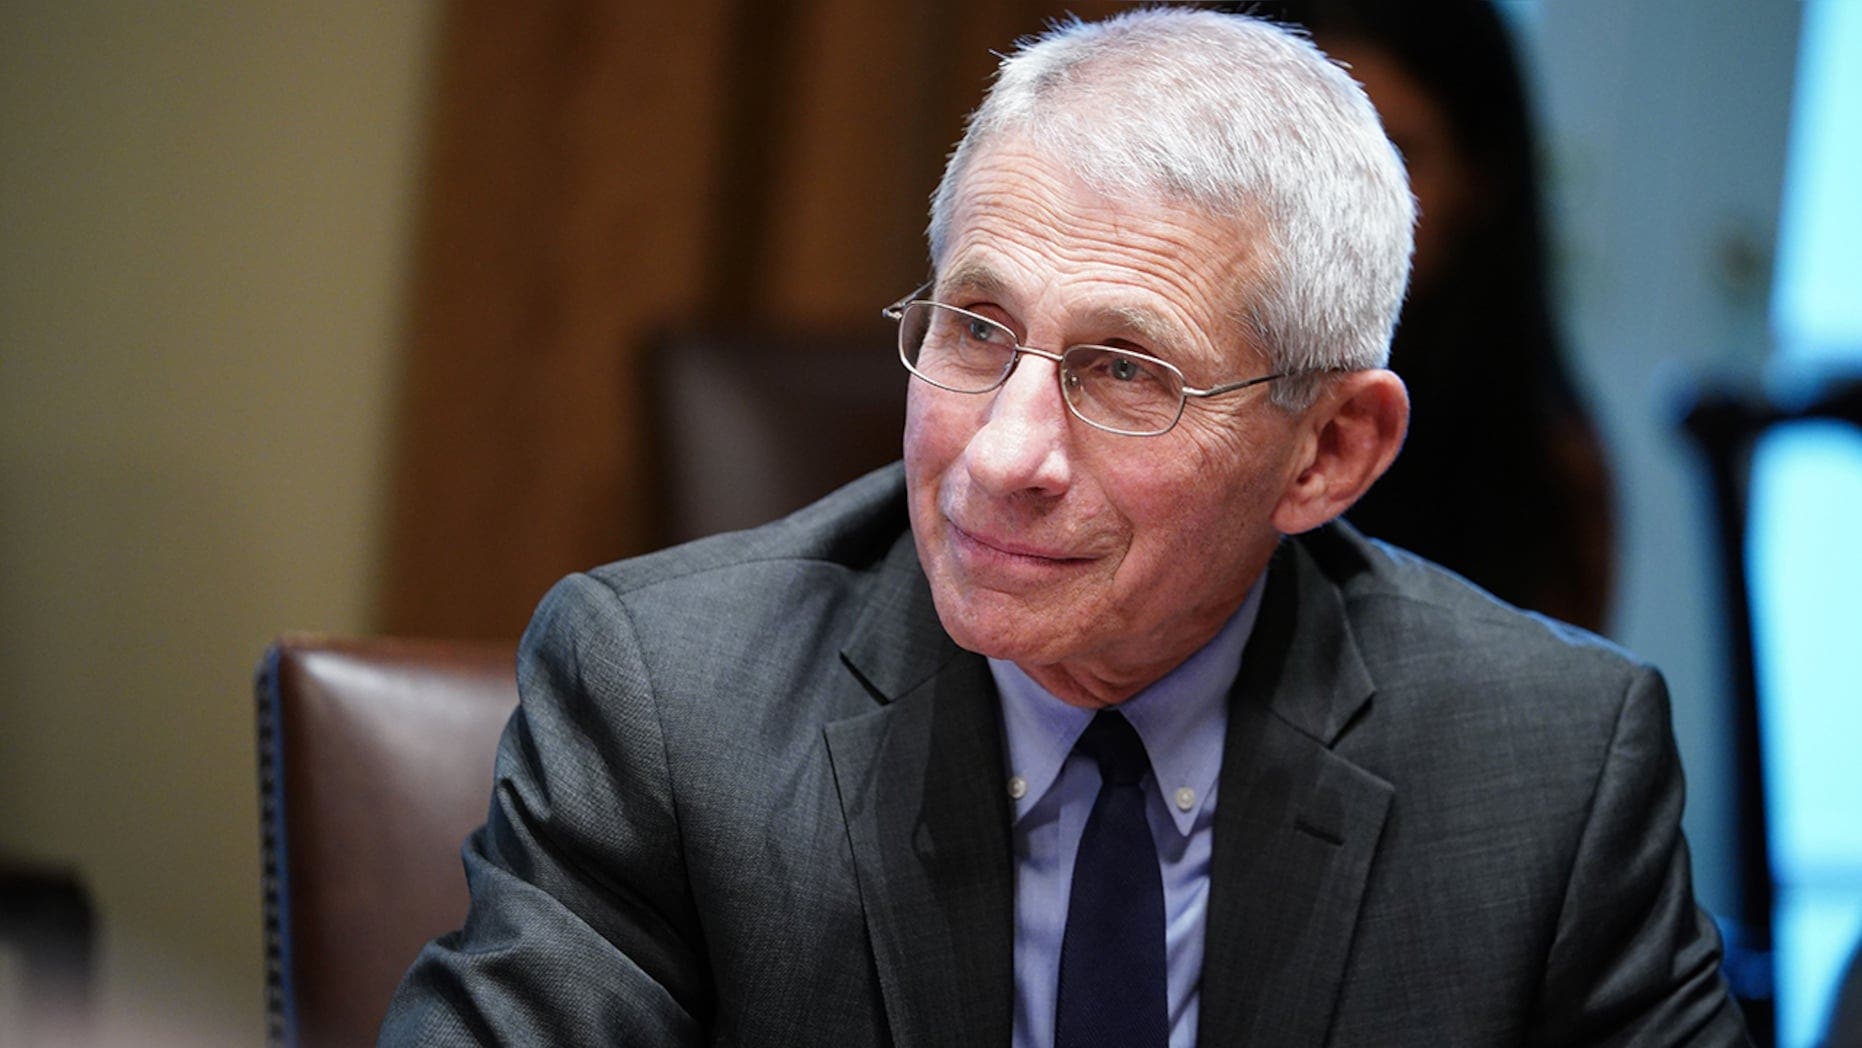 Fauci laughs at the term of the pandemic he inspired: “I’m going to be your Fauci!”